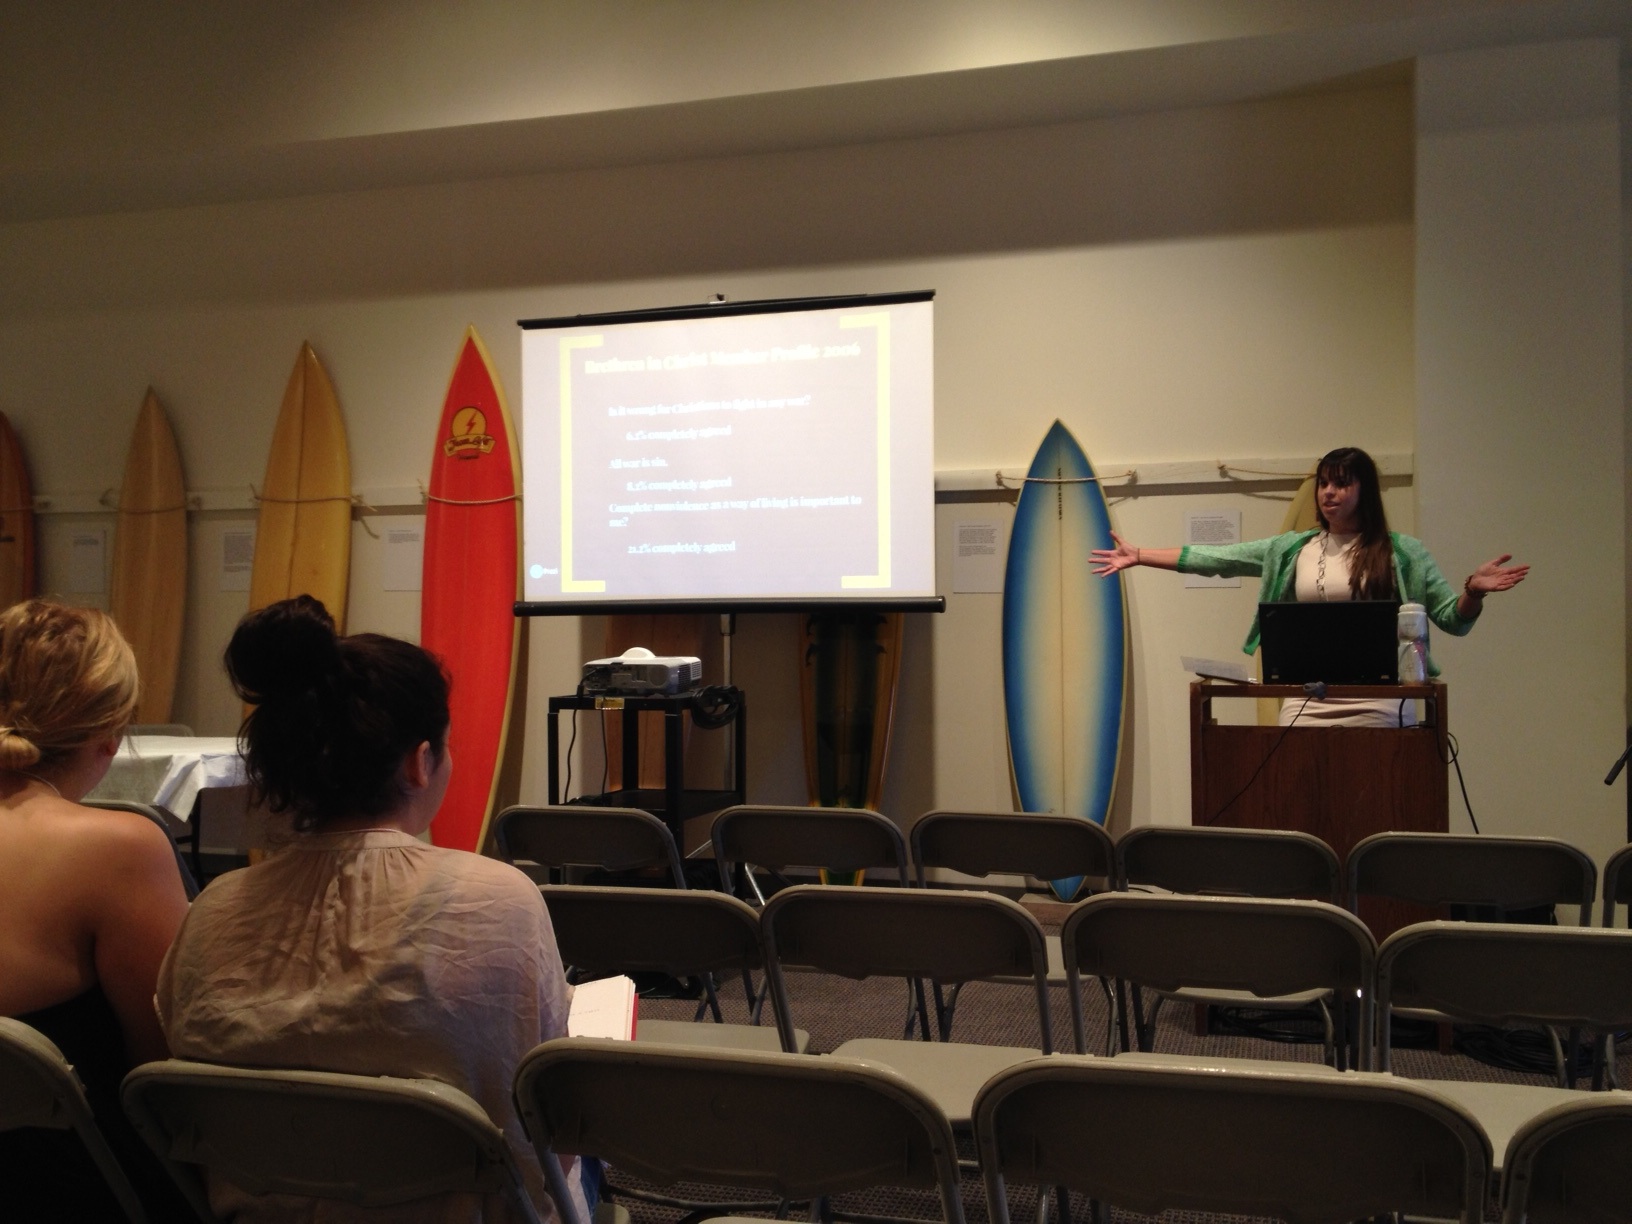 Former Messiah College student Brooke Strayer giving a presentation on the history of the Brethren in Christ peace position at the 2014 Conference on Faith and History undergraduate research conference. Yes, those are surfboards behind her -- she's presenting in the Pepperdine University Surfboard Museum!